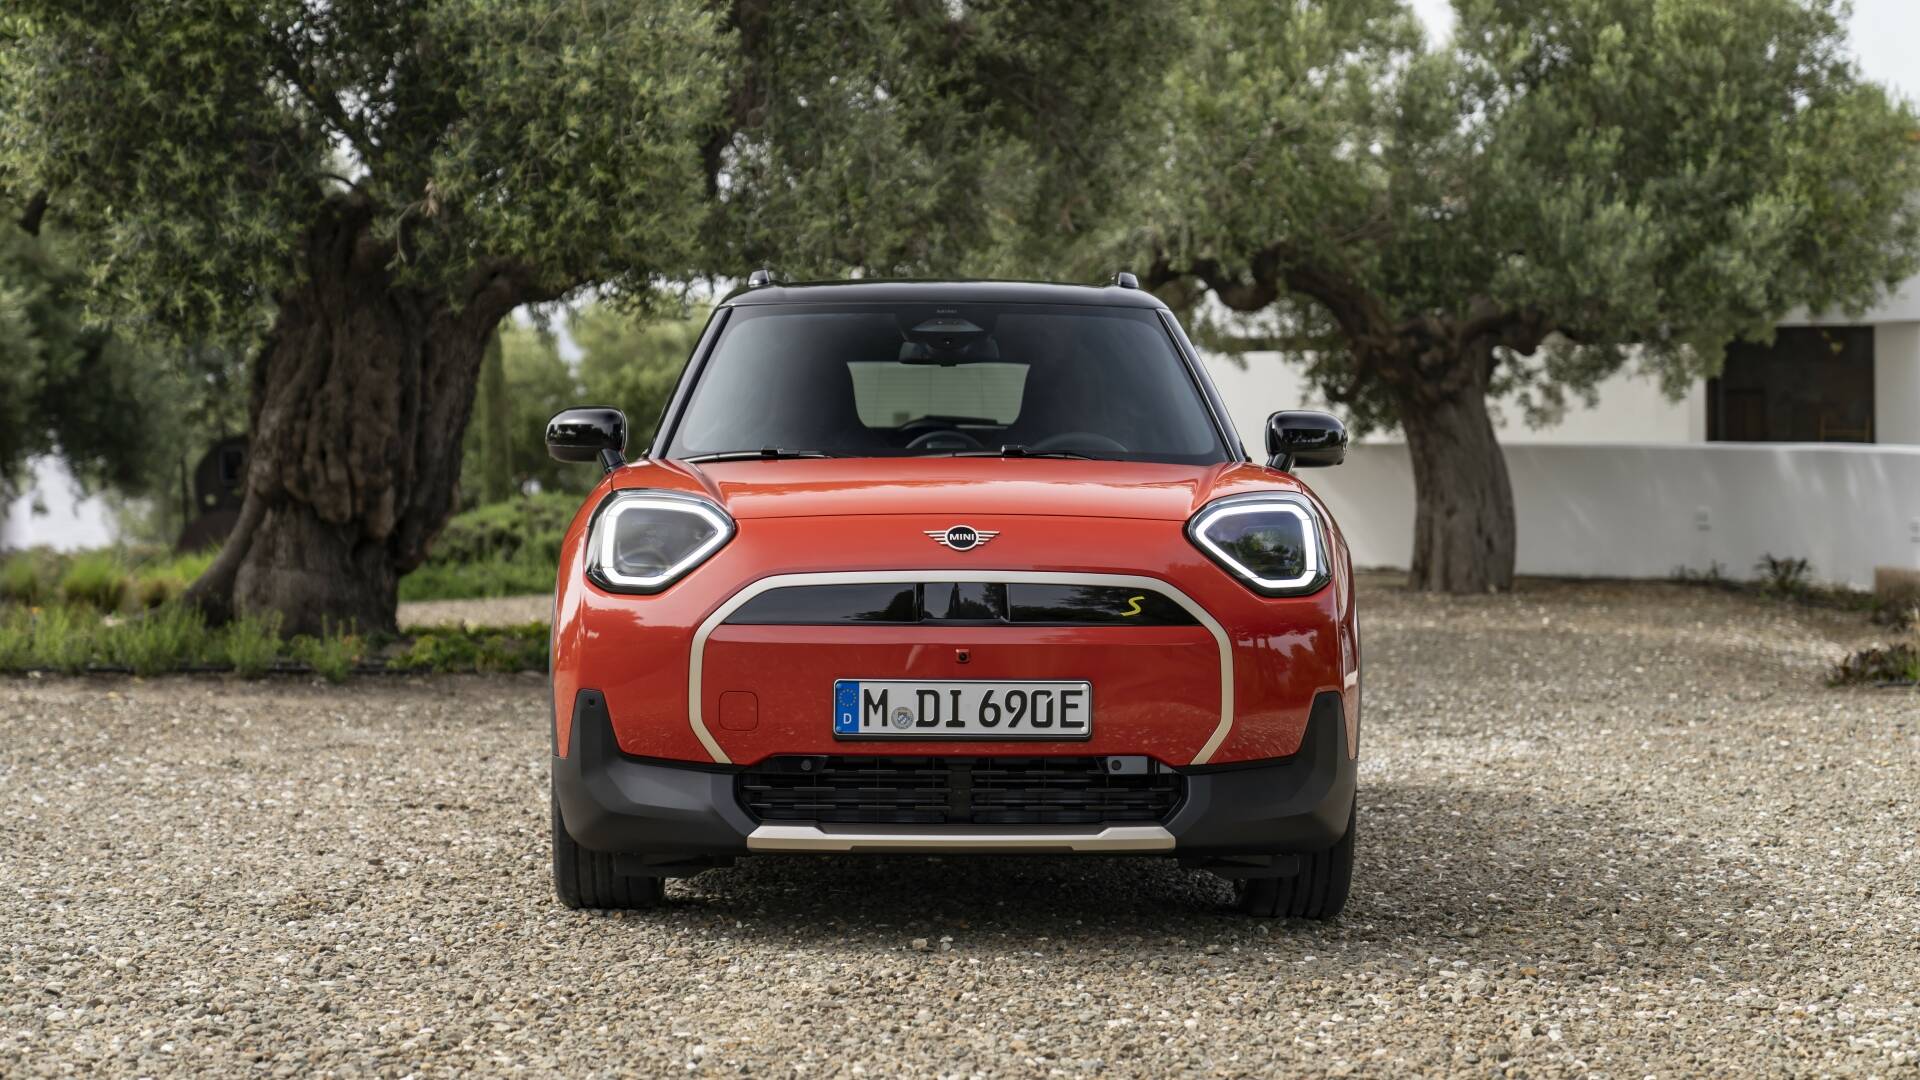 The Front Profile Of The New Mini Aceman (Credits BMW Pressroom)